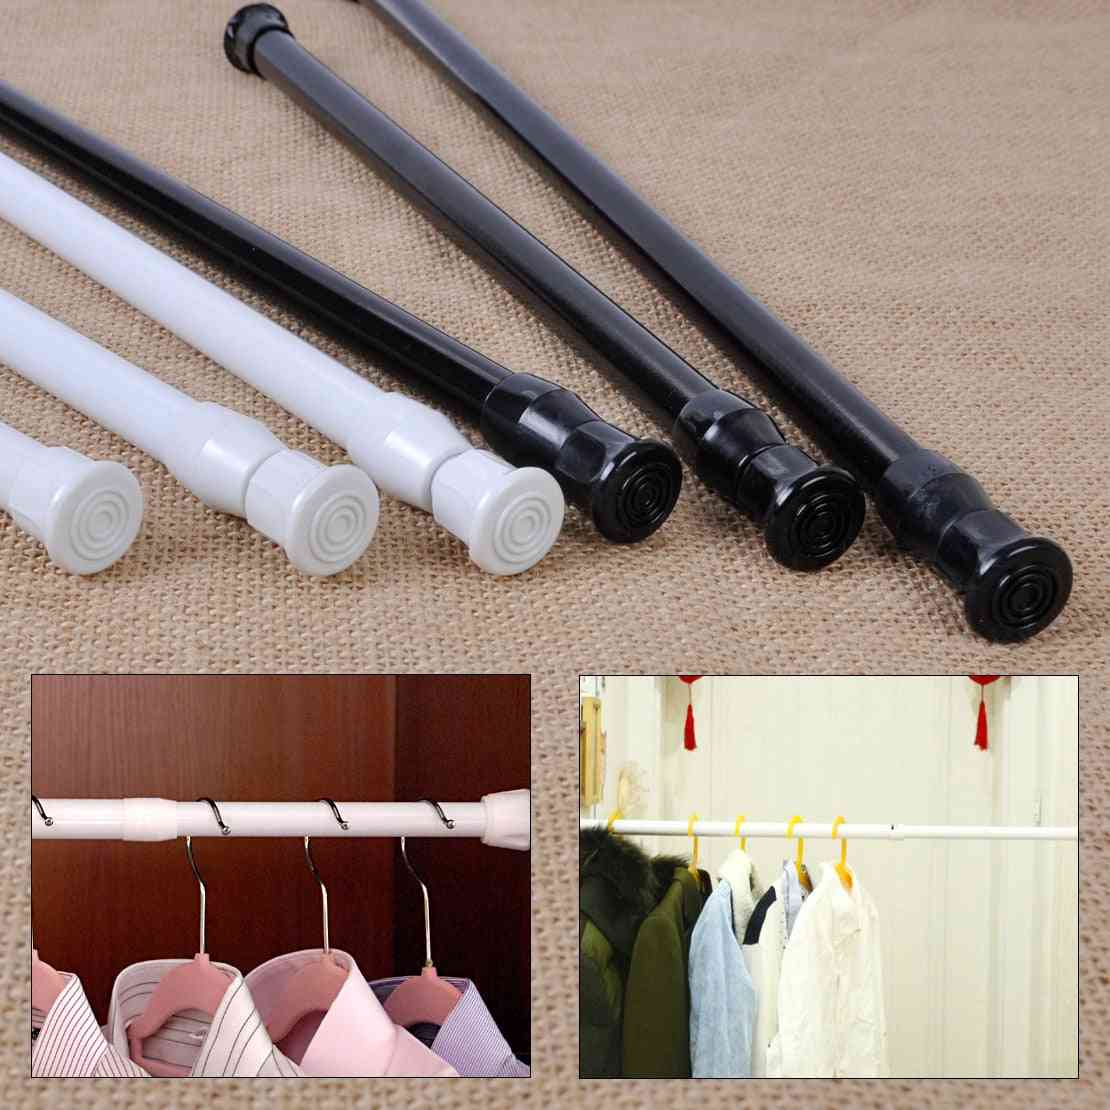 Extendable Adjustable- Spring Tension Rod, Pole Curtain